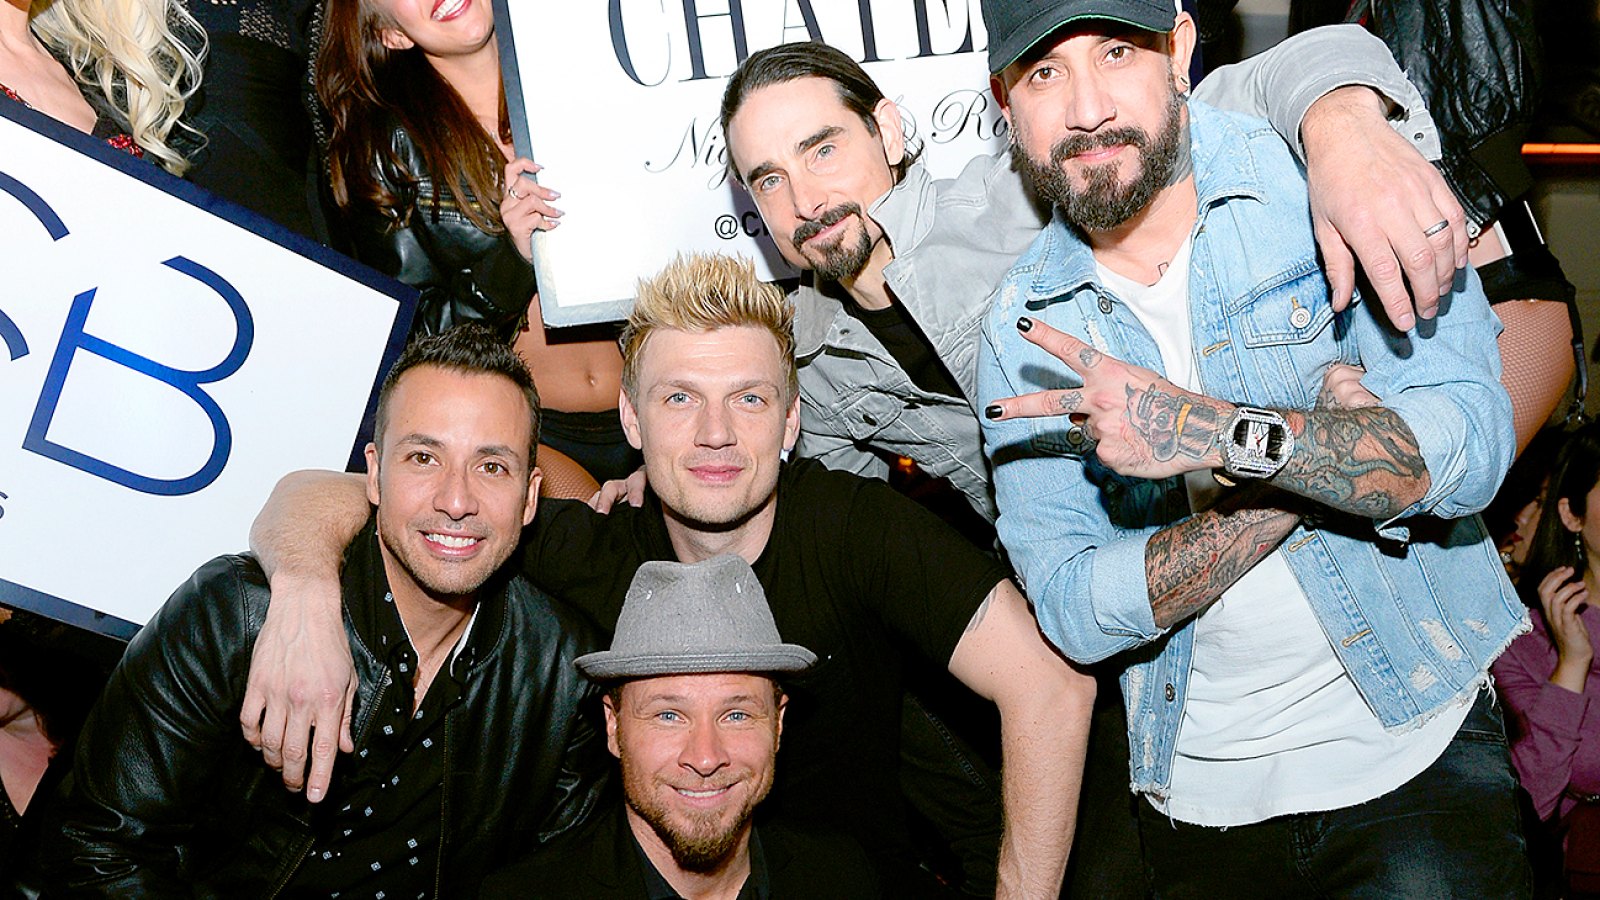 Howie Dorough, Brian Littrell, Nick Carter, Kevin Richardson and A.J. McLean of the Backstreet Boys attend the after party of the debut of the group's residency "Larger Than Life" at the Chateau Nightclub & Rooftop at the Paris Las Vegas on March 2, 2017 in Las Vegas, Nevada.